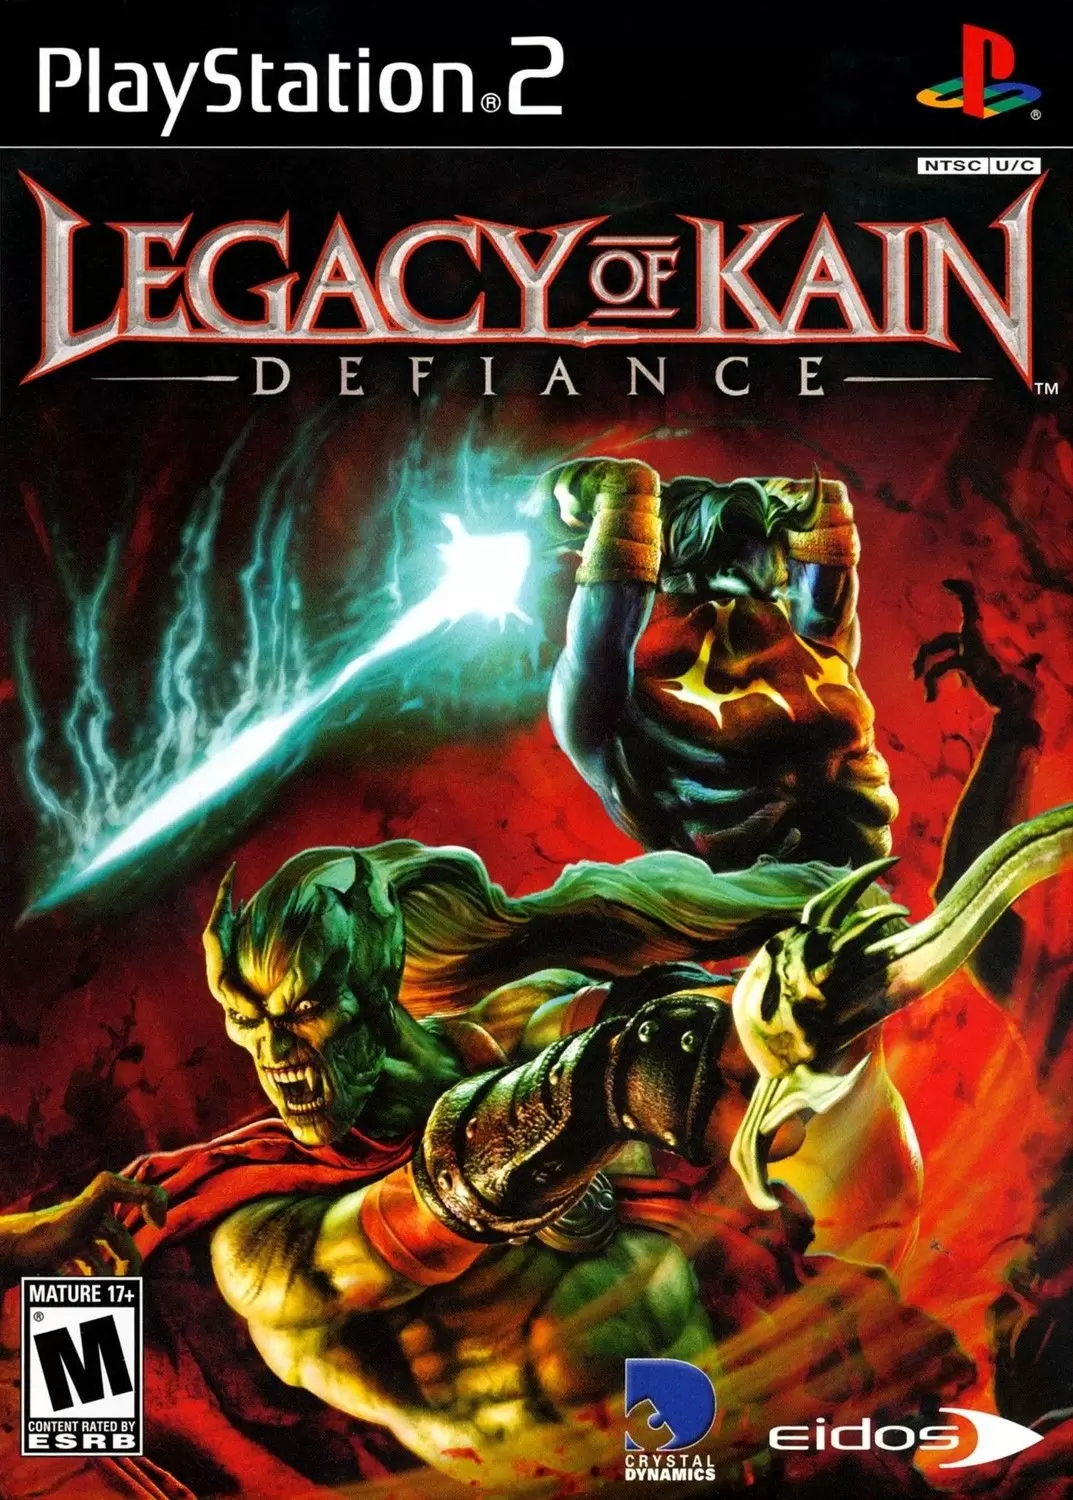 PS2 Games - Legacy of Kain: Defiance